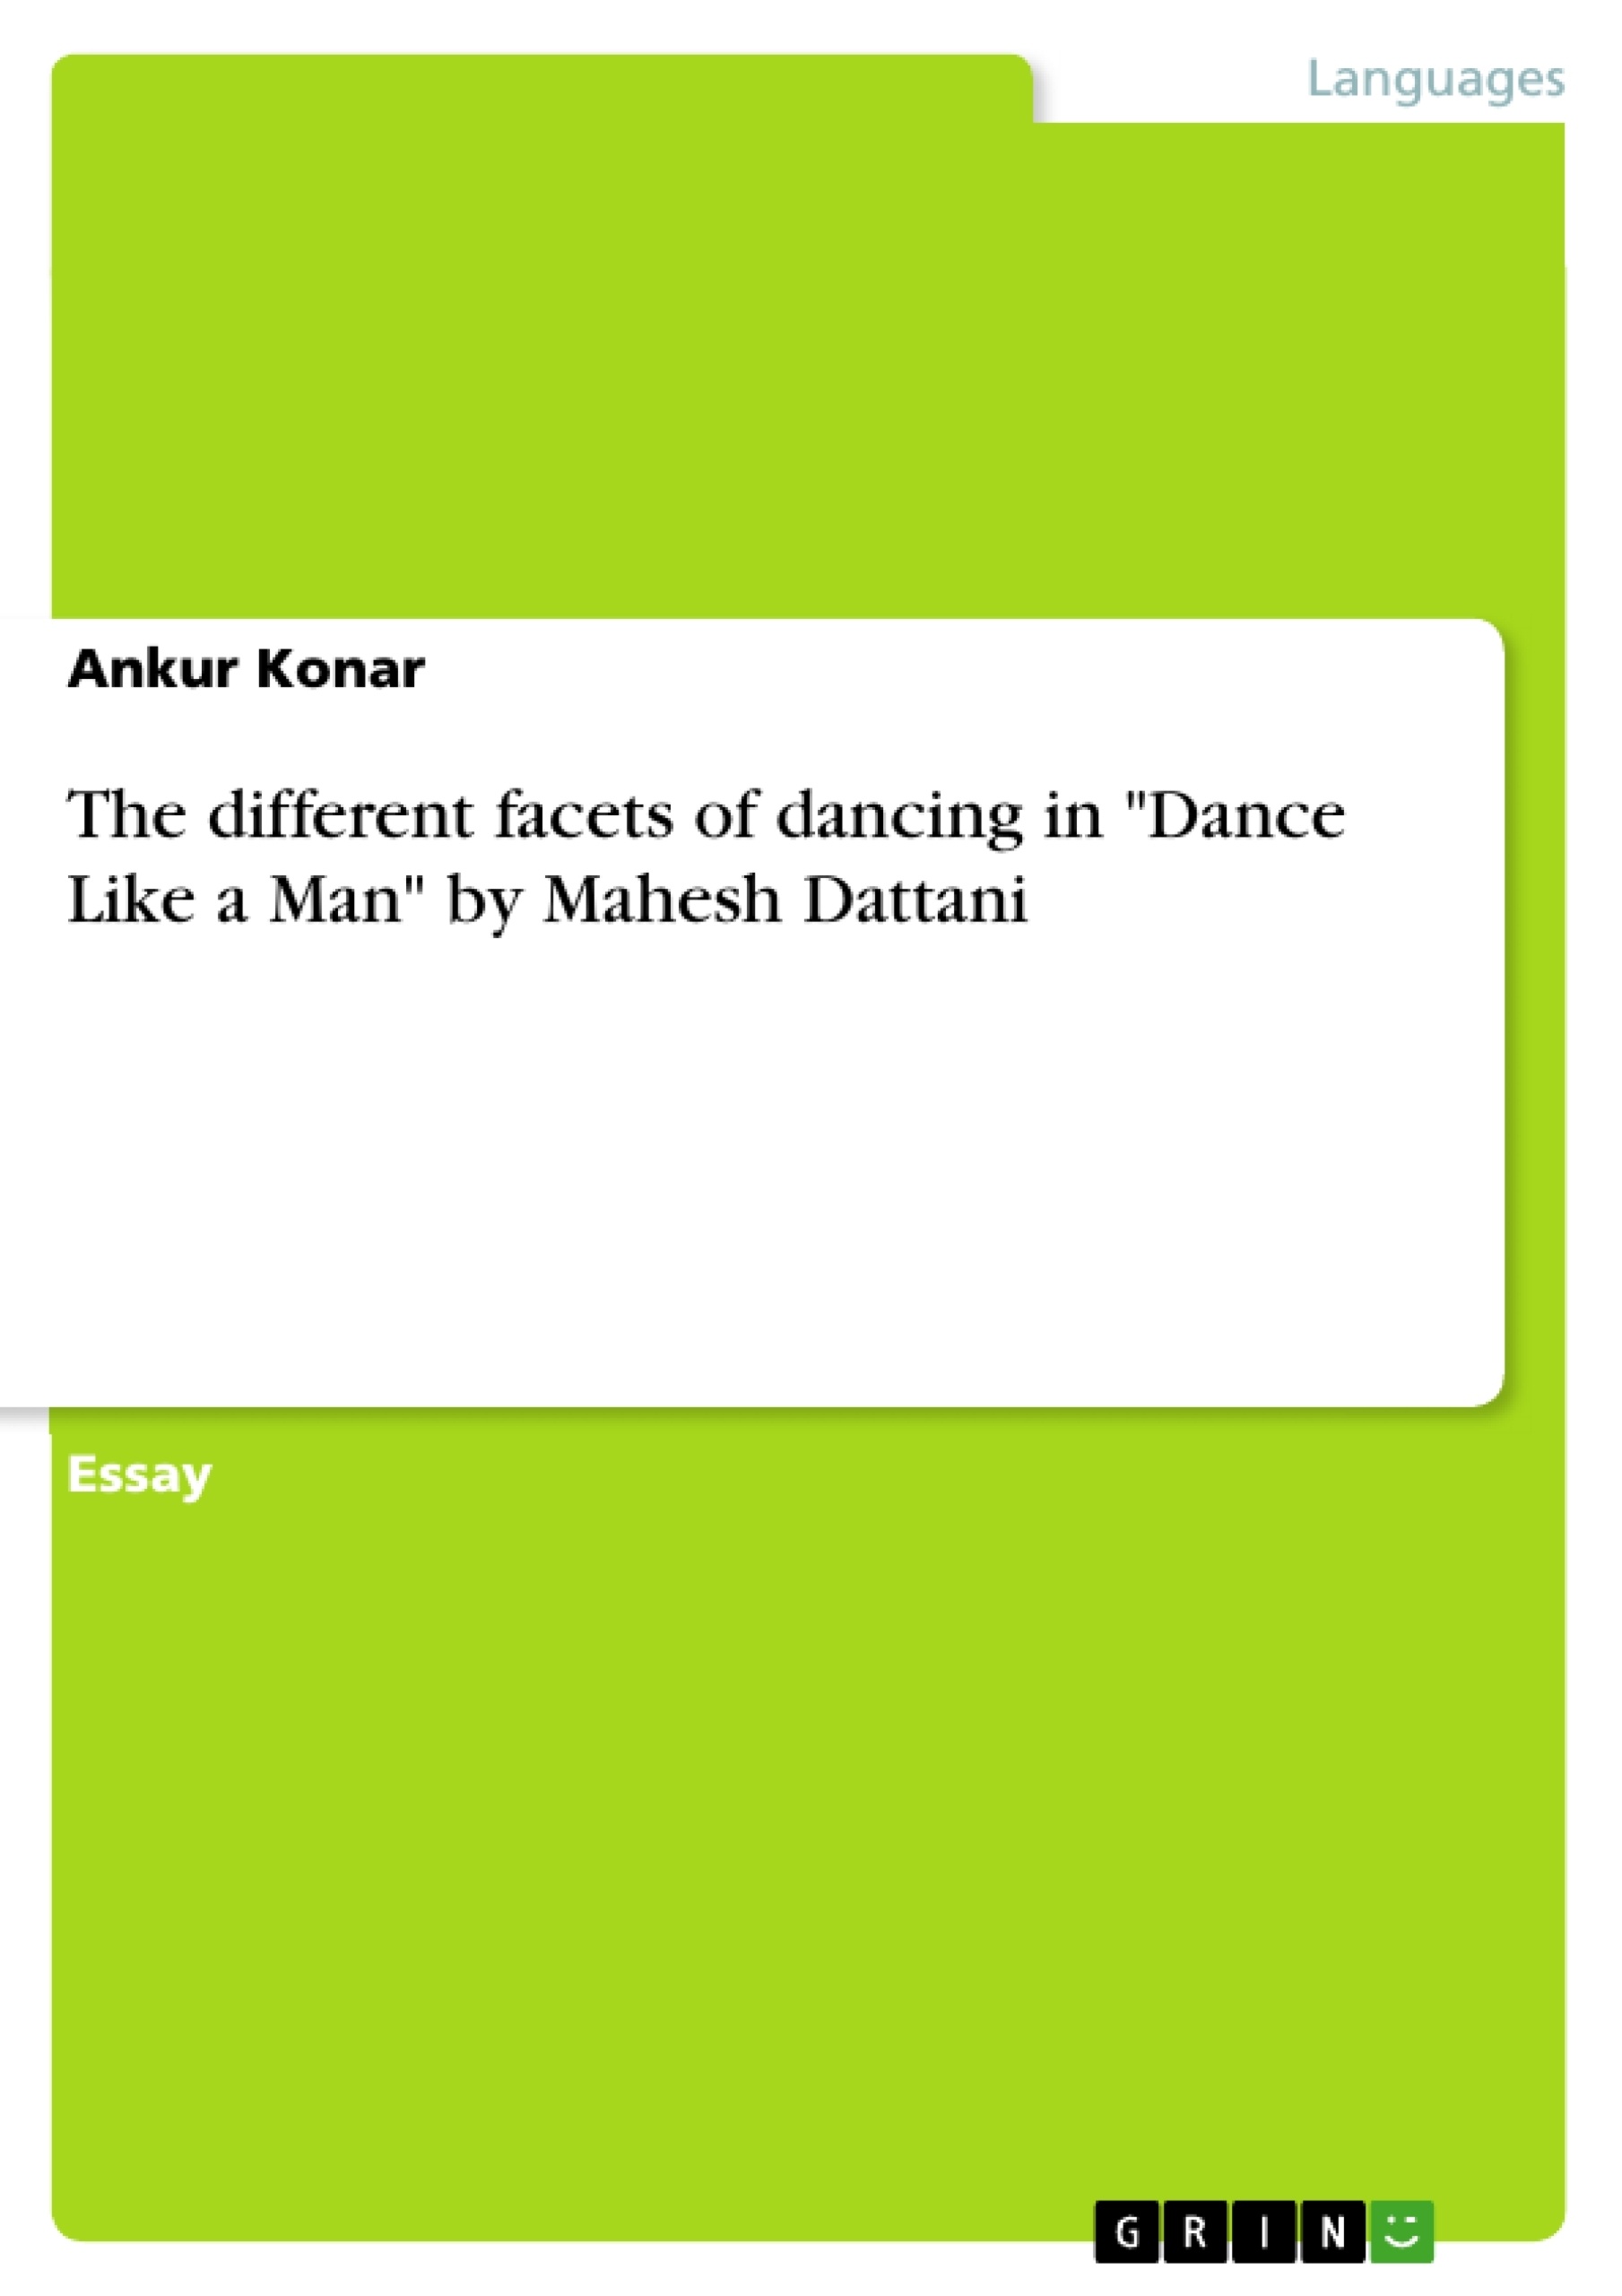 Title: The different facets of dancing in "Dance Like a Man" by Mahesh Dattani